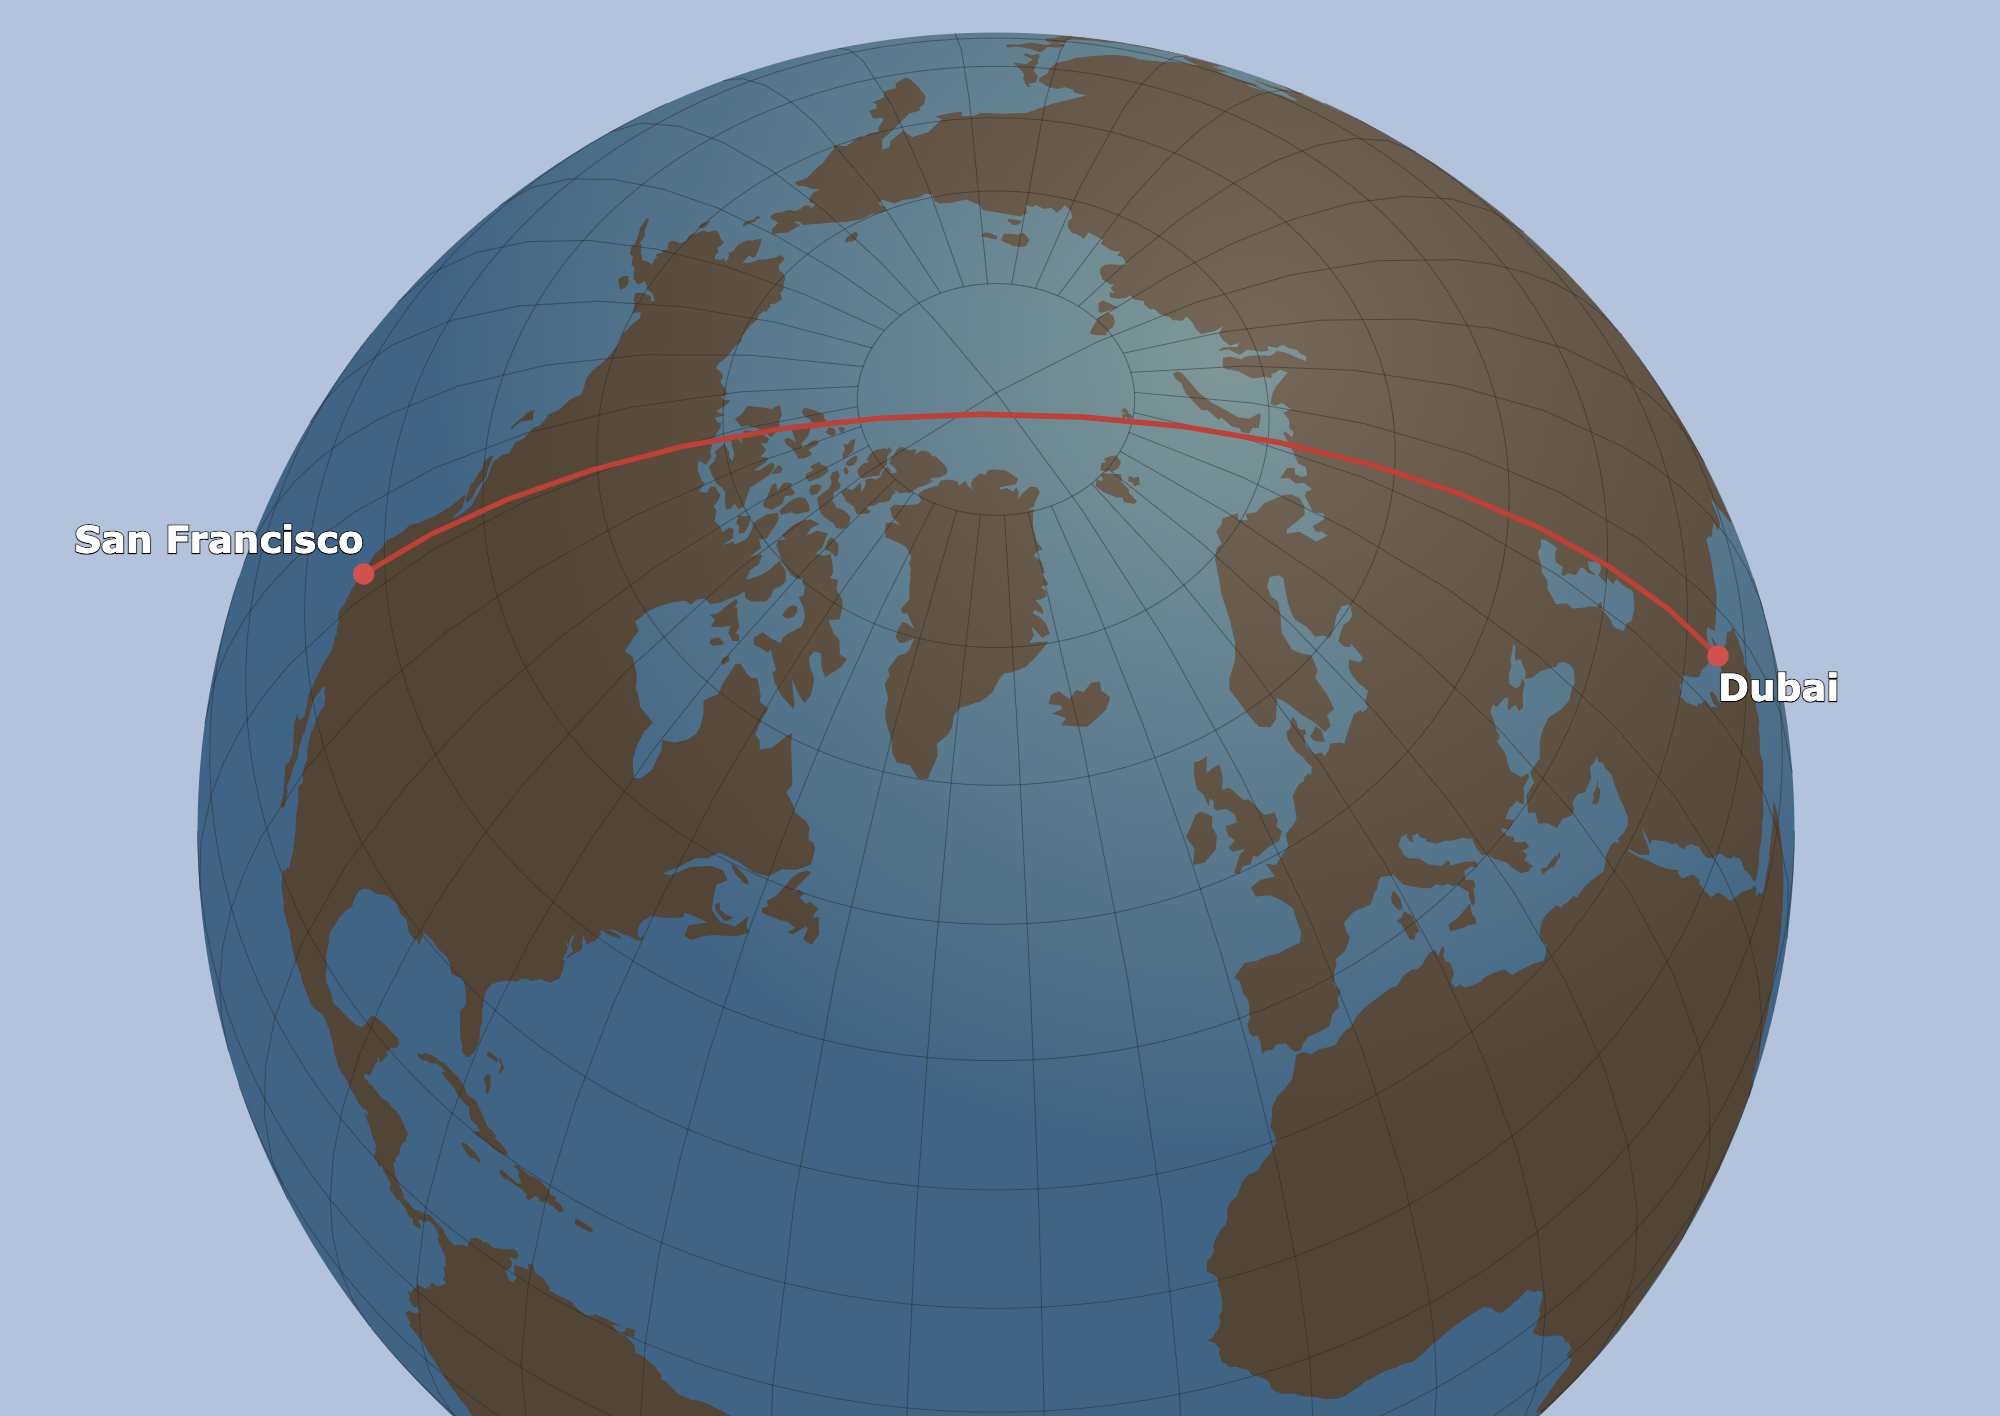 A globe showing a line between San Francisco and Dubai, passing over the North Pole